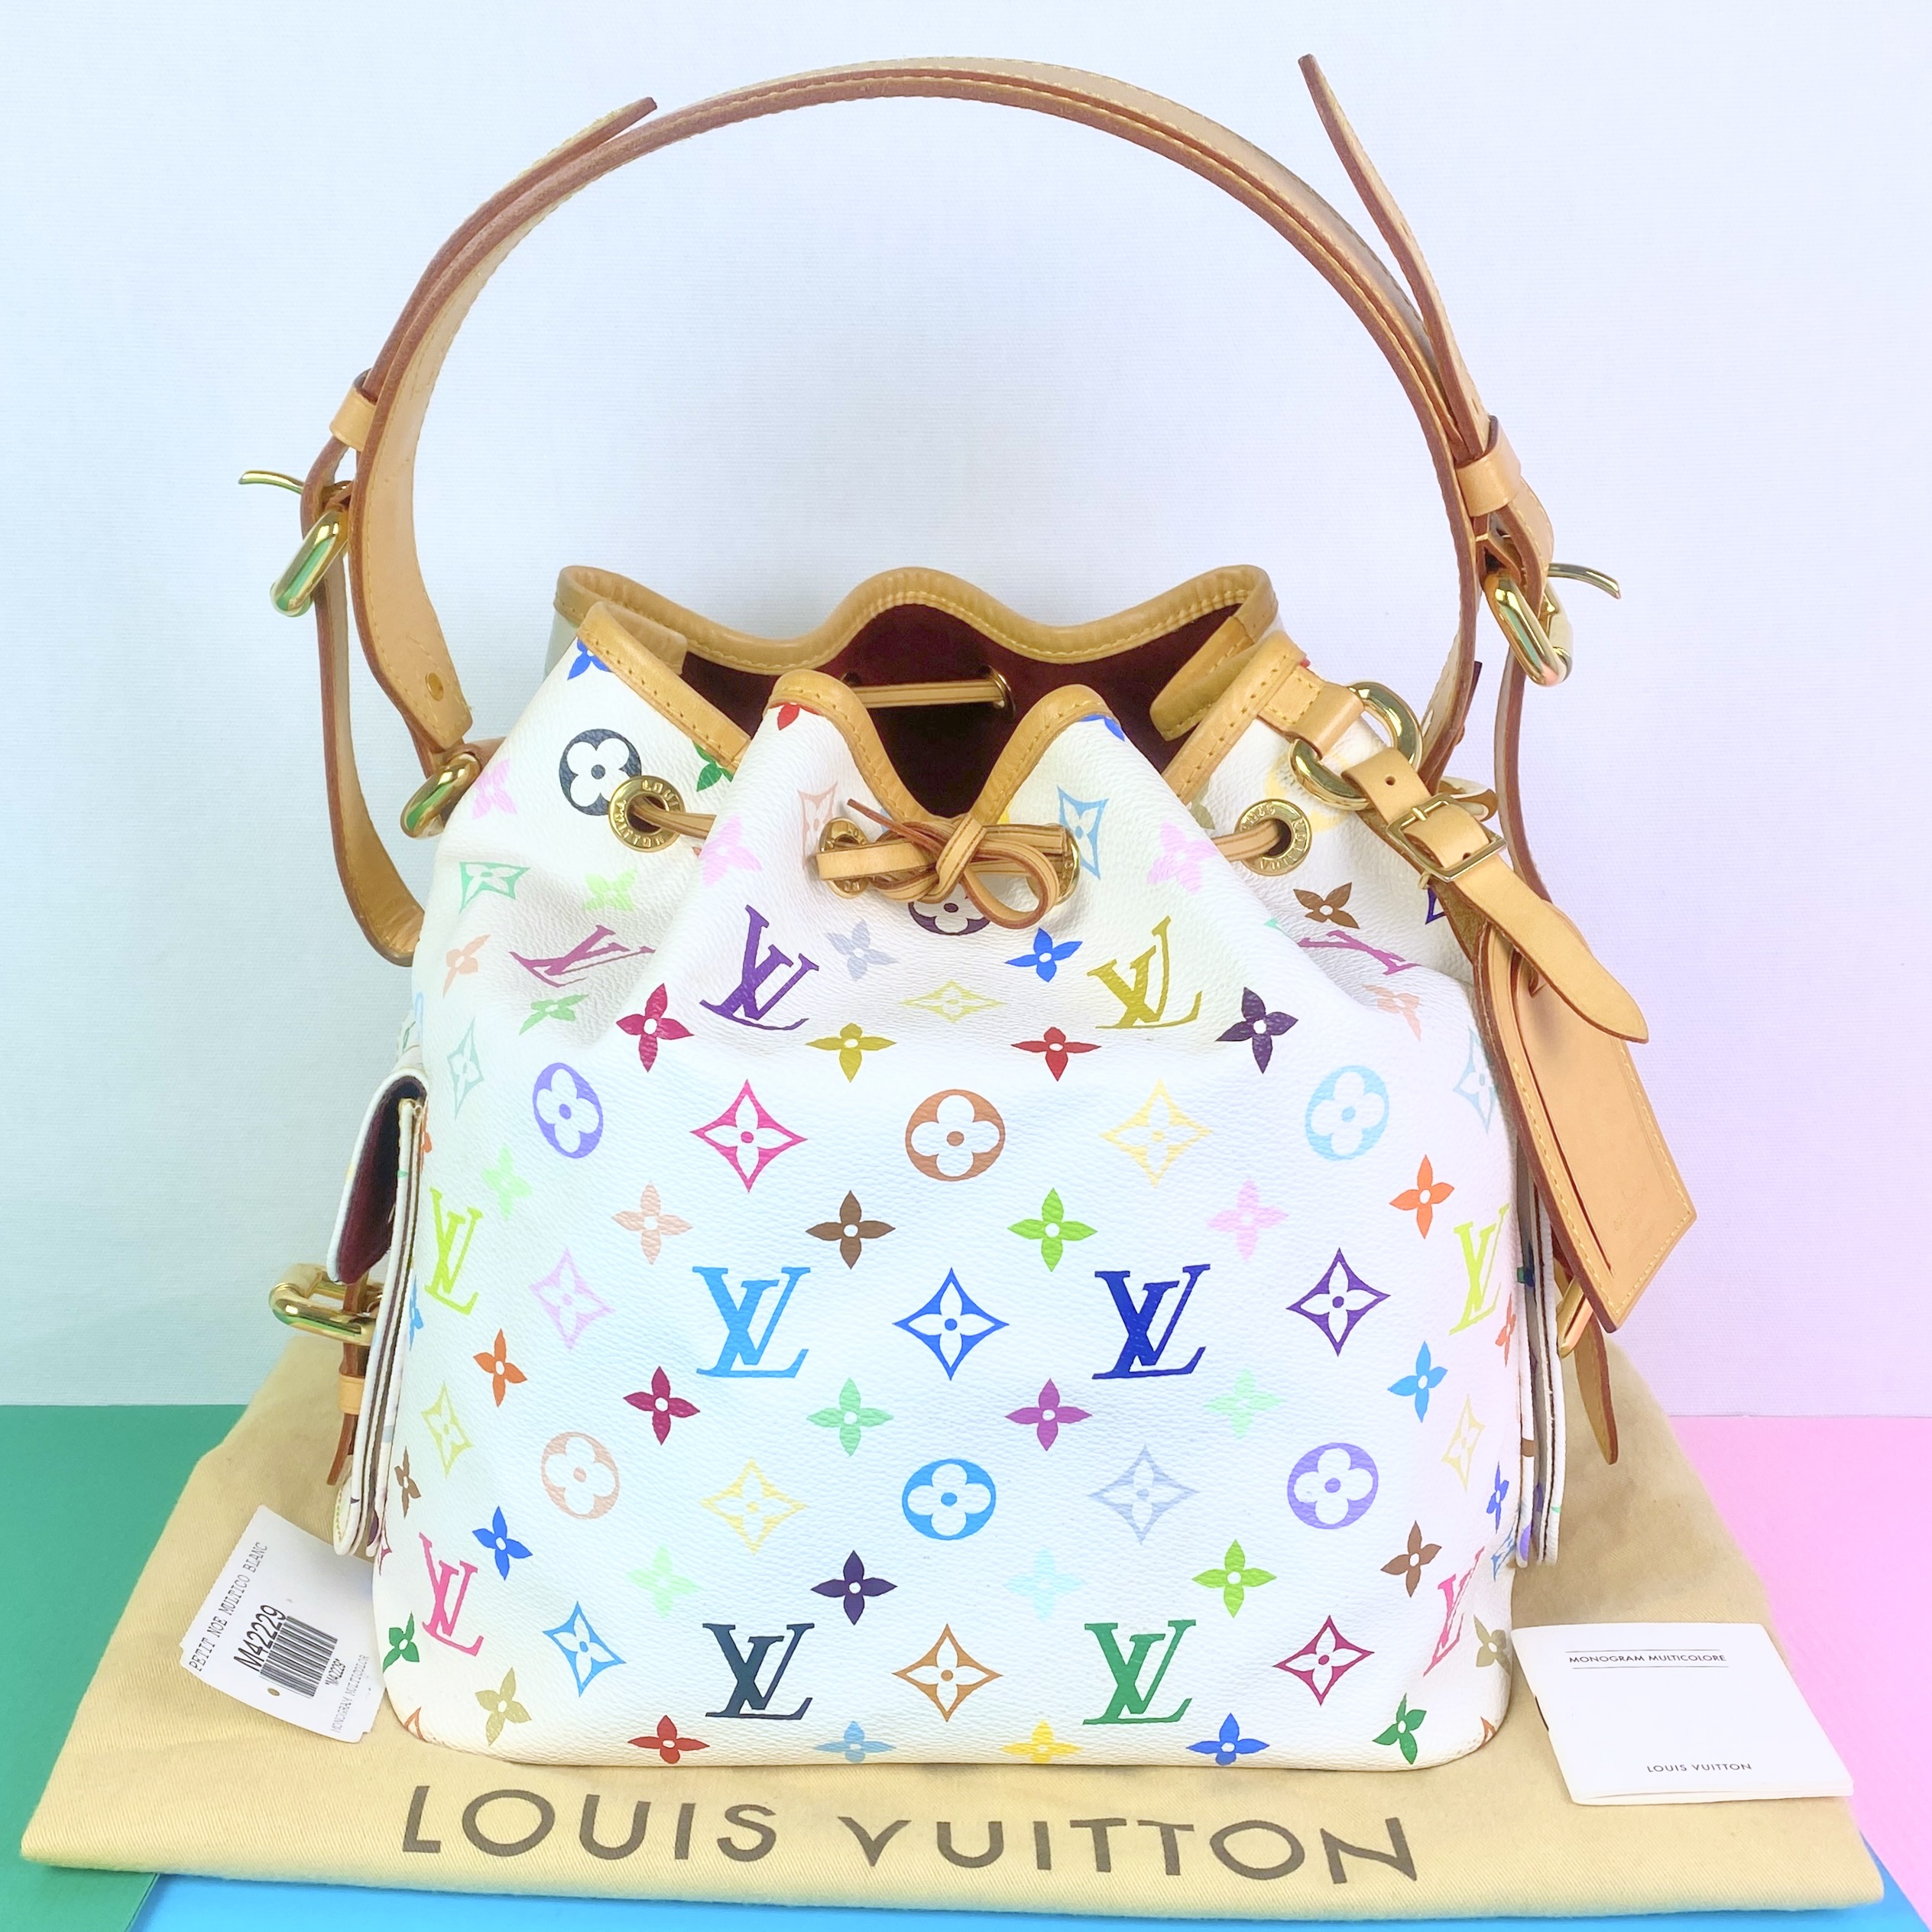 Louis Vuitton Discontinued Size! Artsy Gm! Code Ca2170 Made In Spain!  Shoulder Bag